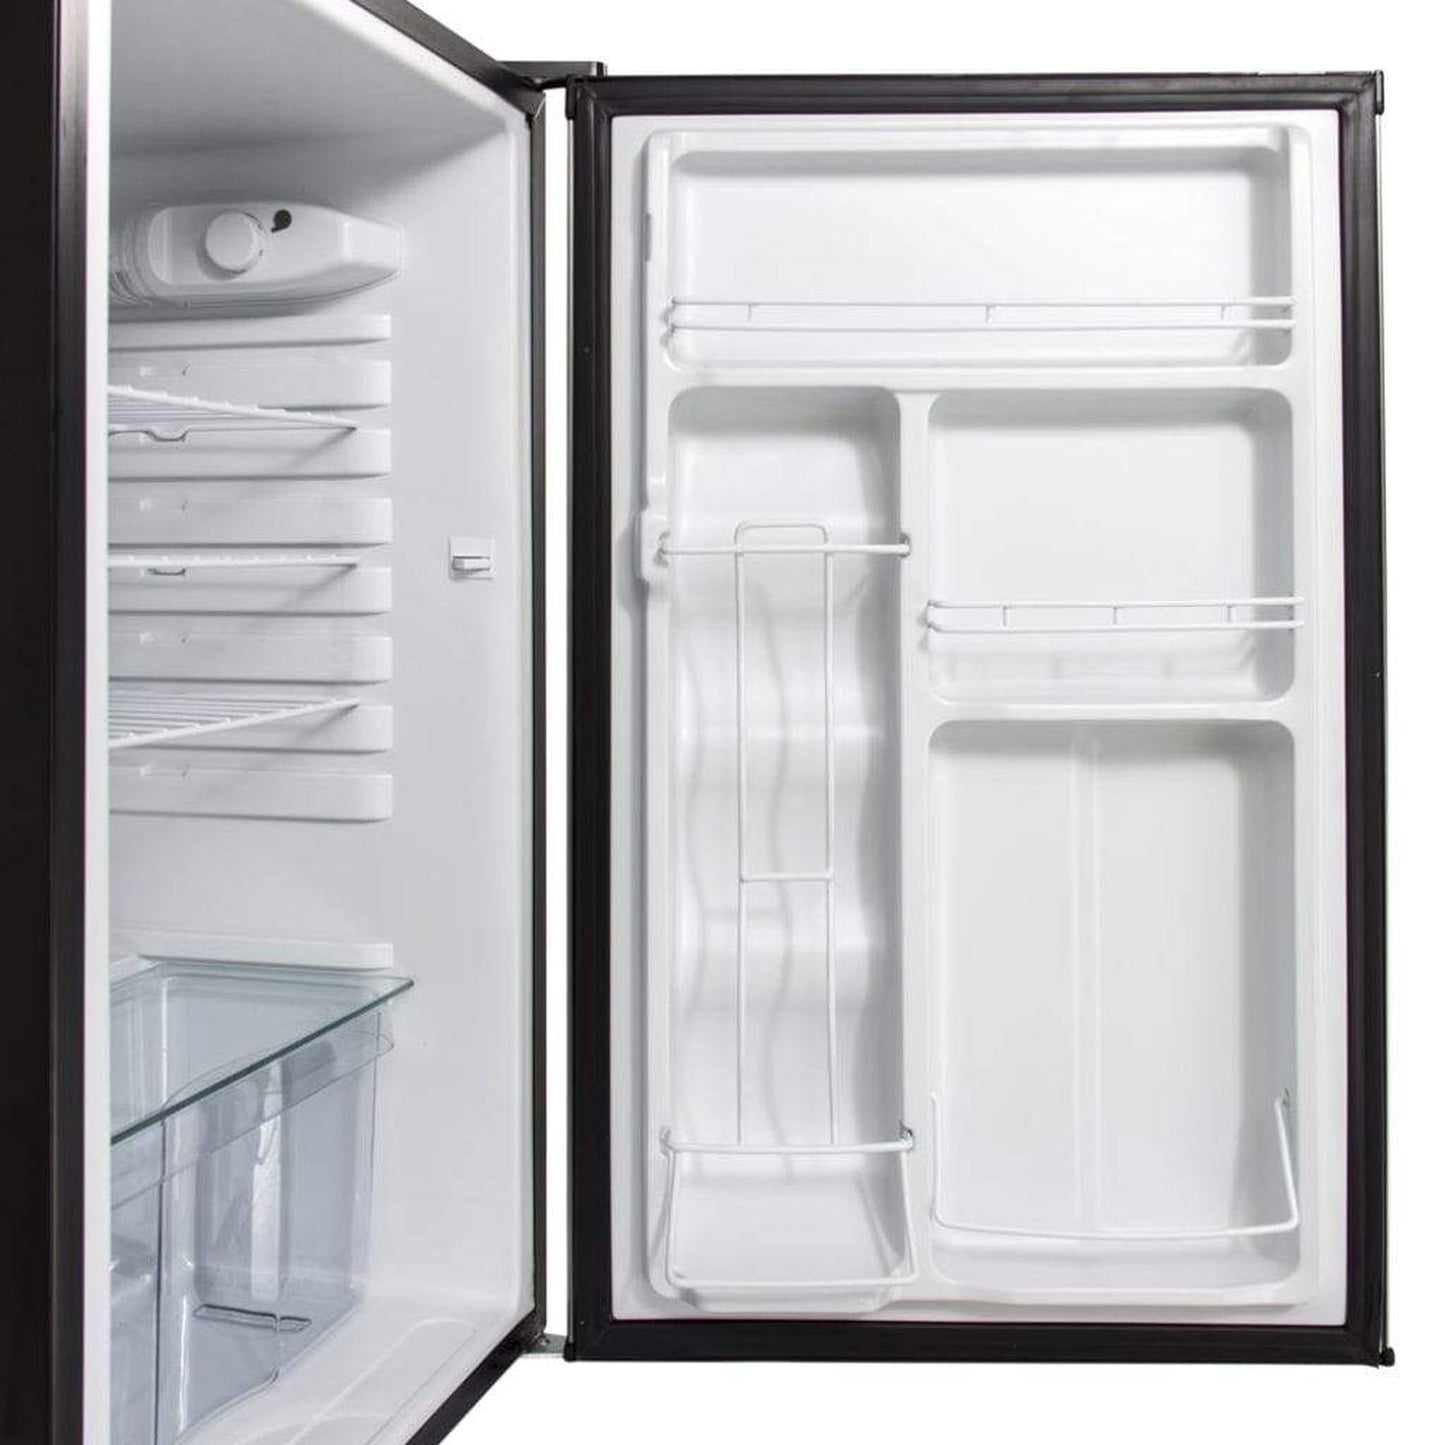 Blaze 20" Stainless Front Refrigerator 4.5 CU. FT.